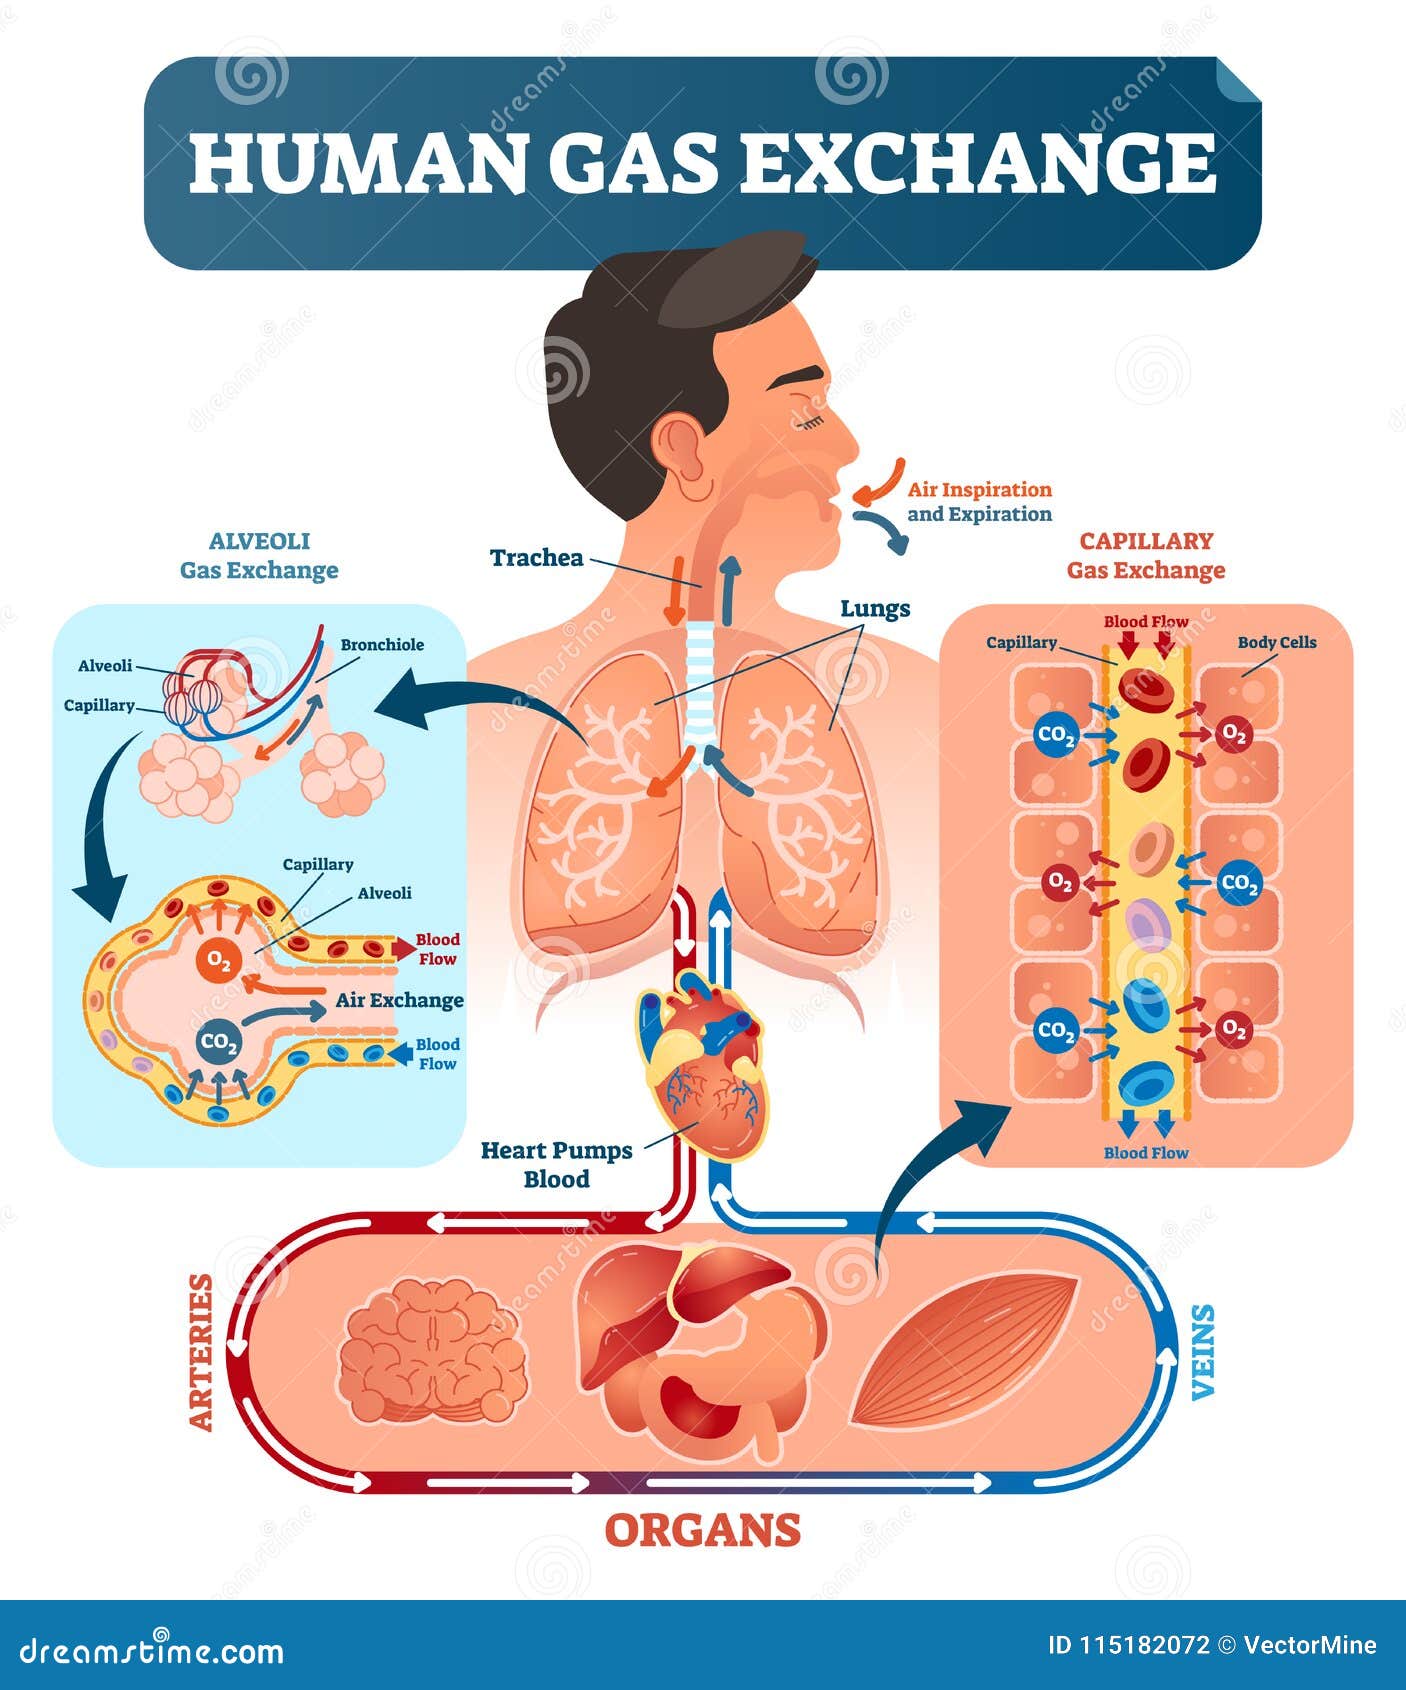 human gas exchange system  . oxygen travel from lungs to heart, to all body cells and back to lungs as co2.